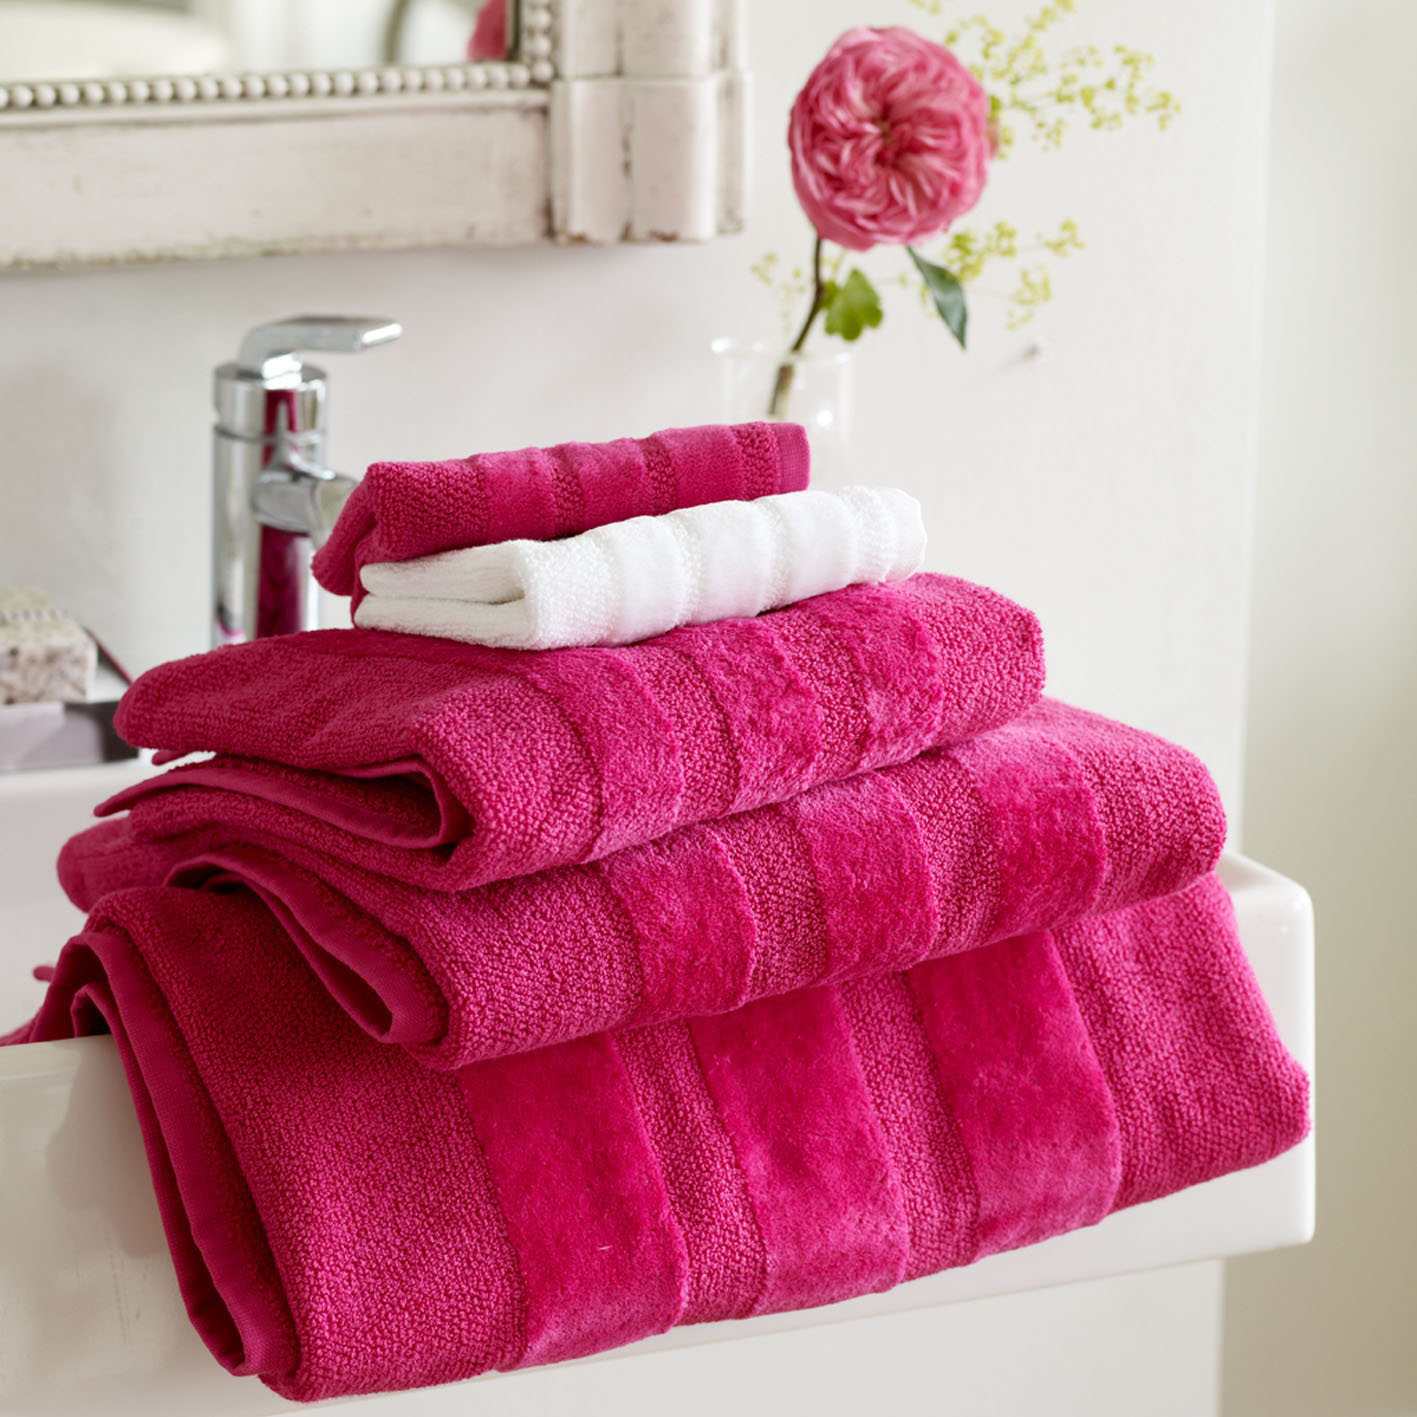 Hard Goods Towels and Robes Buying Agency in Moradabad